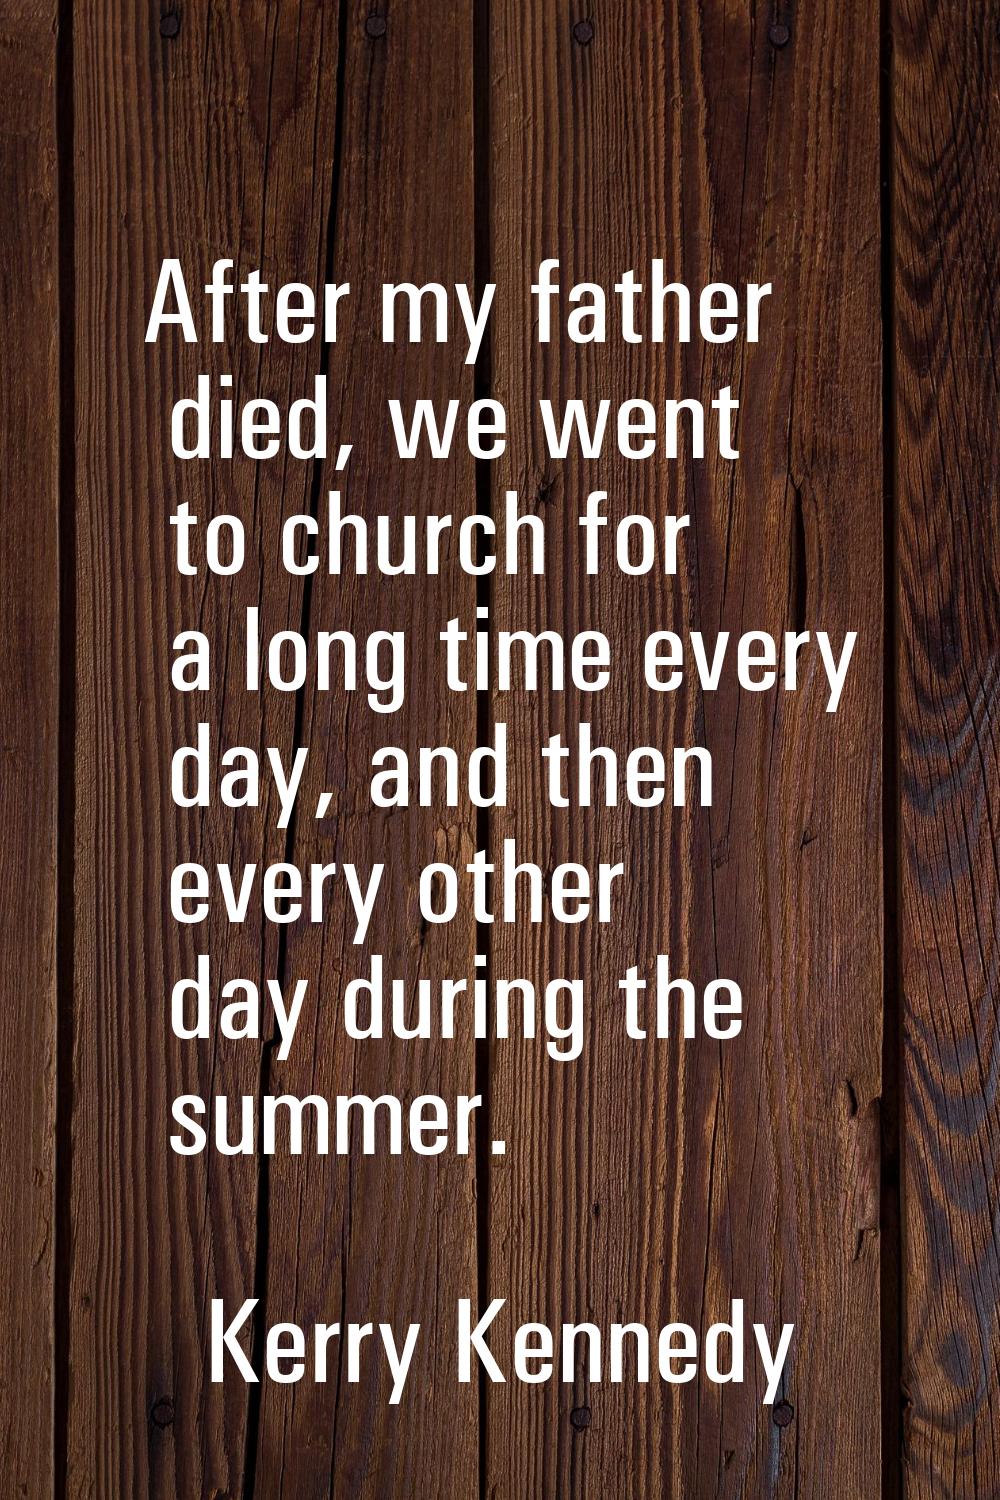 After my father died, we went to church for a long time every day, and then every other day during 